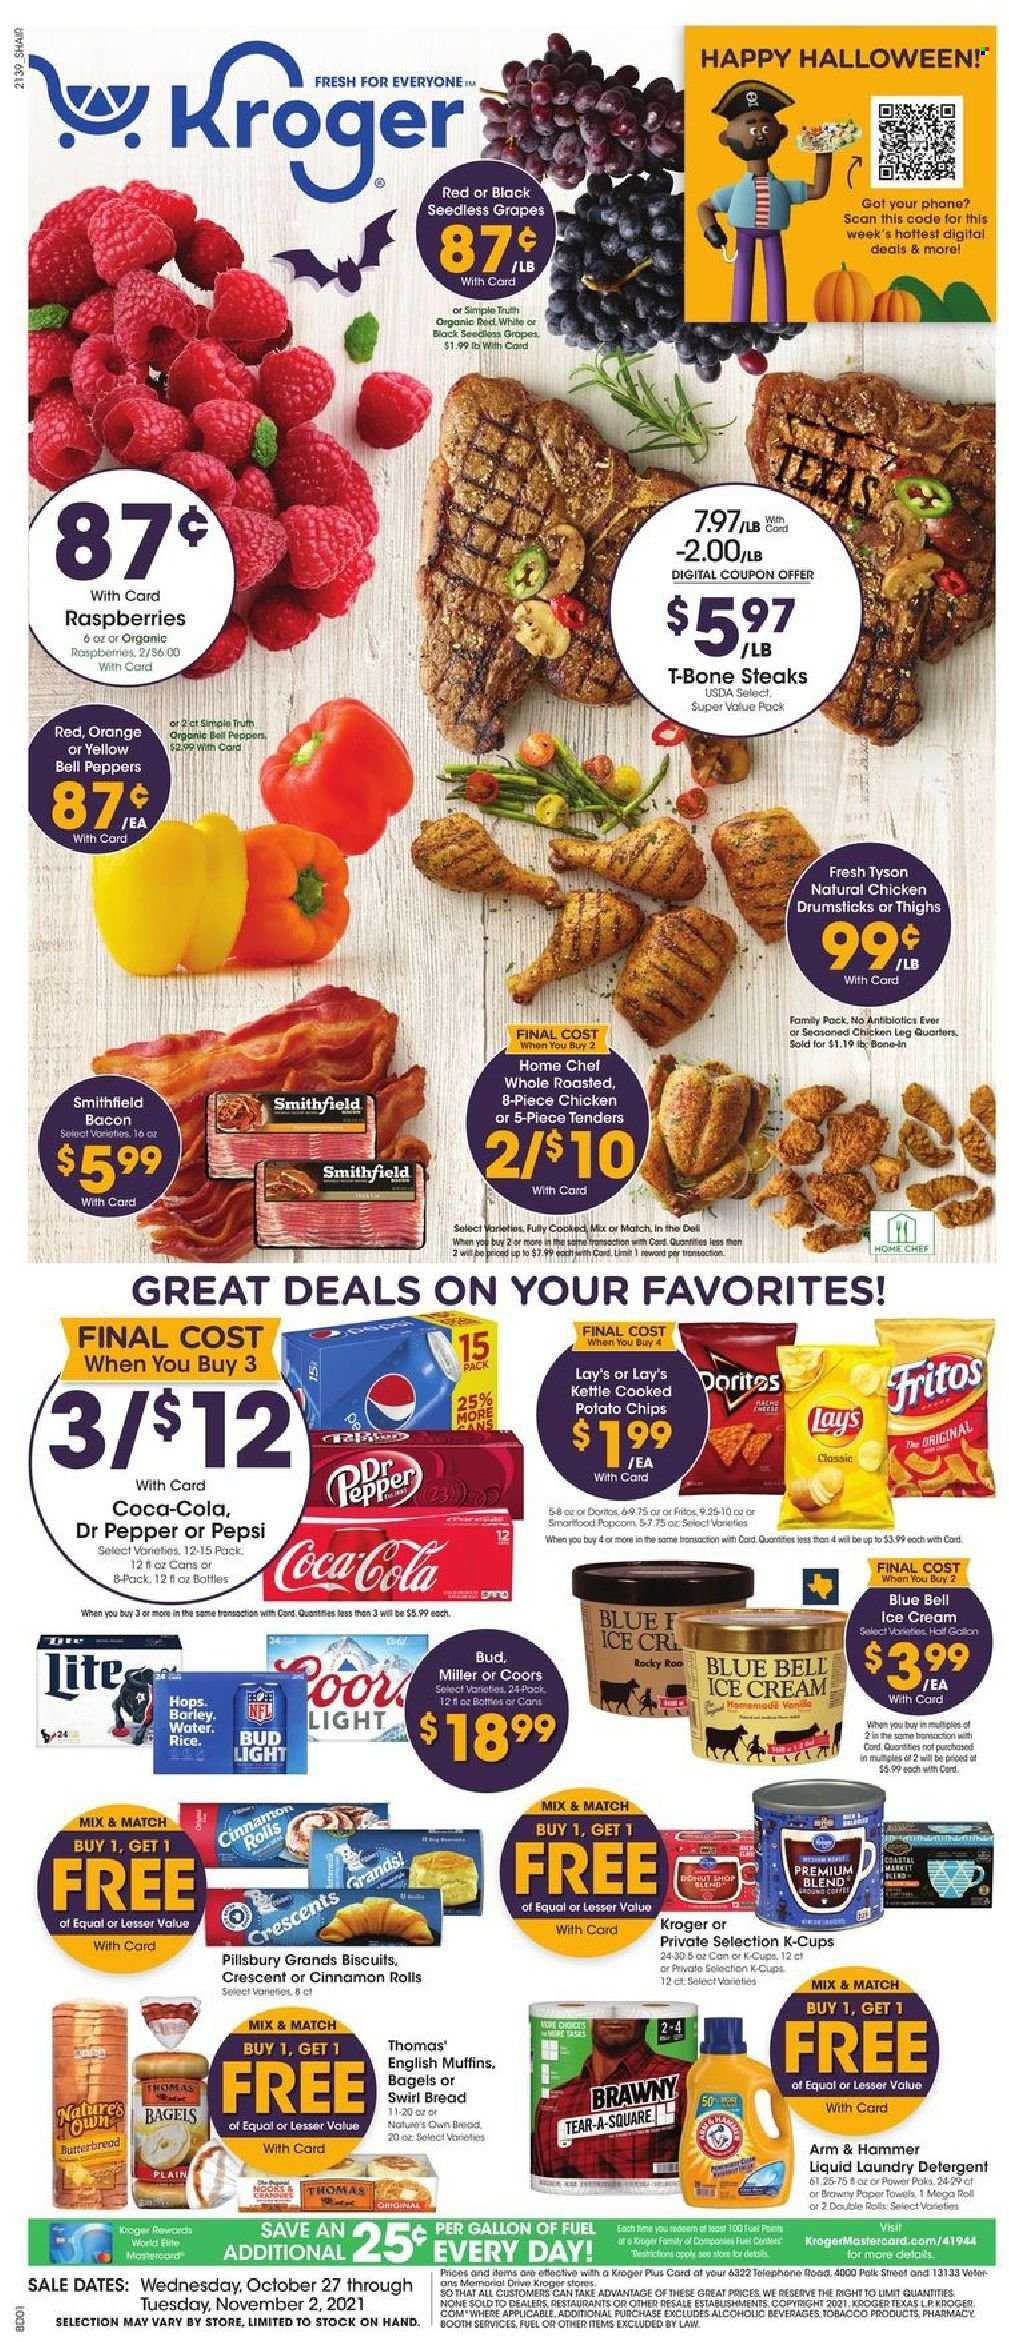 thumbnail - Kroger Flyer - 10/27/2021 - 11/02/2021 - Sales products - Halloween, seedless grapes, bagels, bread, english muffins, cinnamon roll, bell peppers, peppers, grapes, oranges, Pillsbury, bacon, ice cream, Blue Bell, biscuit, Fritos, potato chips, chips, Lay’s, ARM & HAMMER, Coca-Cola, Pepsi, Dr. Pepper, coffee capsules, L'Or, K-Cups, beer, Bud Light, Miller, chicken legs, chicken drumsticks, beef meat, t-bone steak, steak, detergent, laundry detergent, Nature's Own, Coors. Page 1.